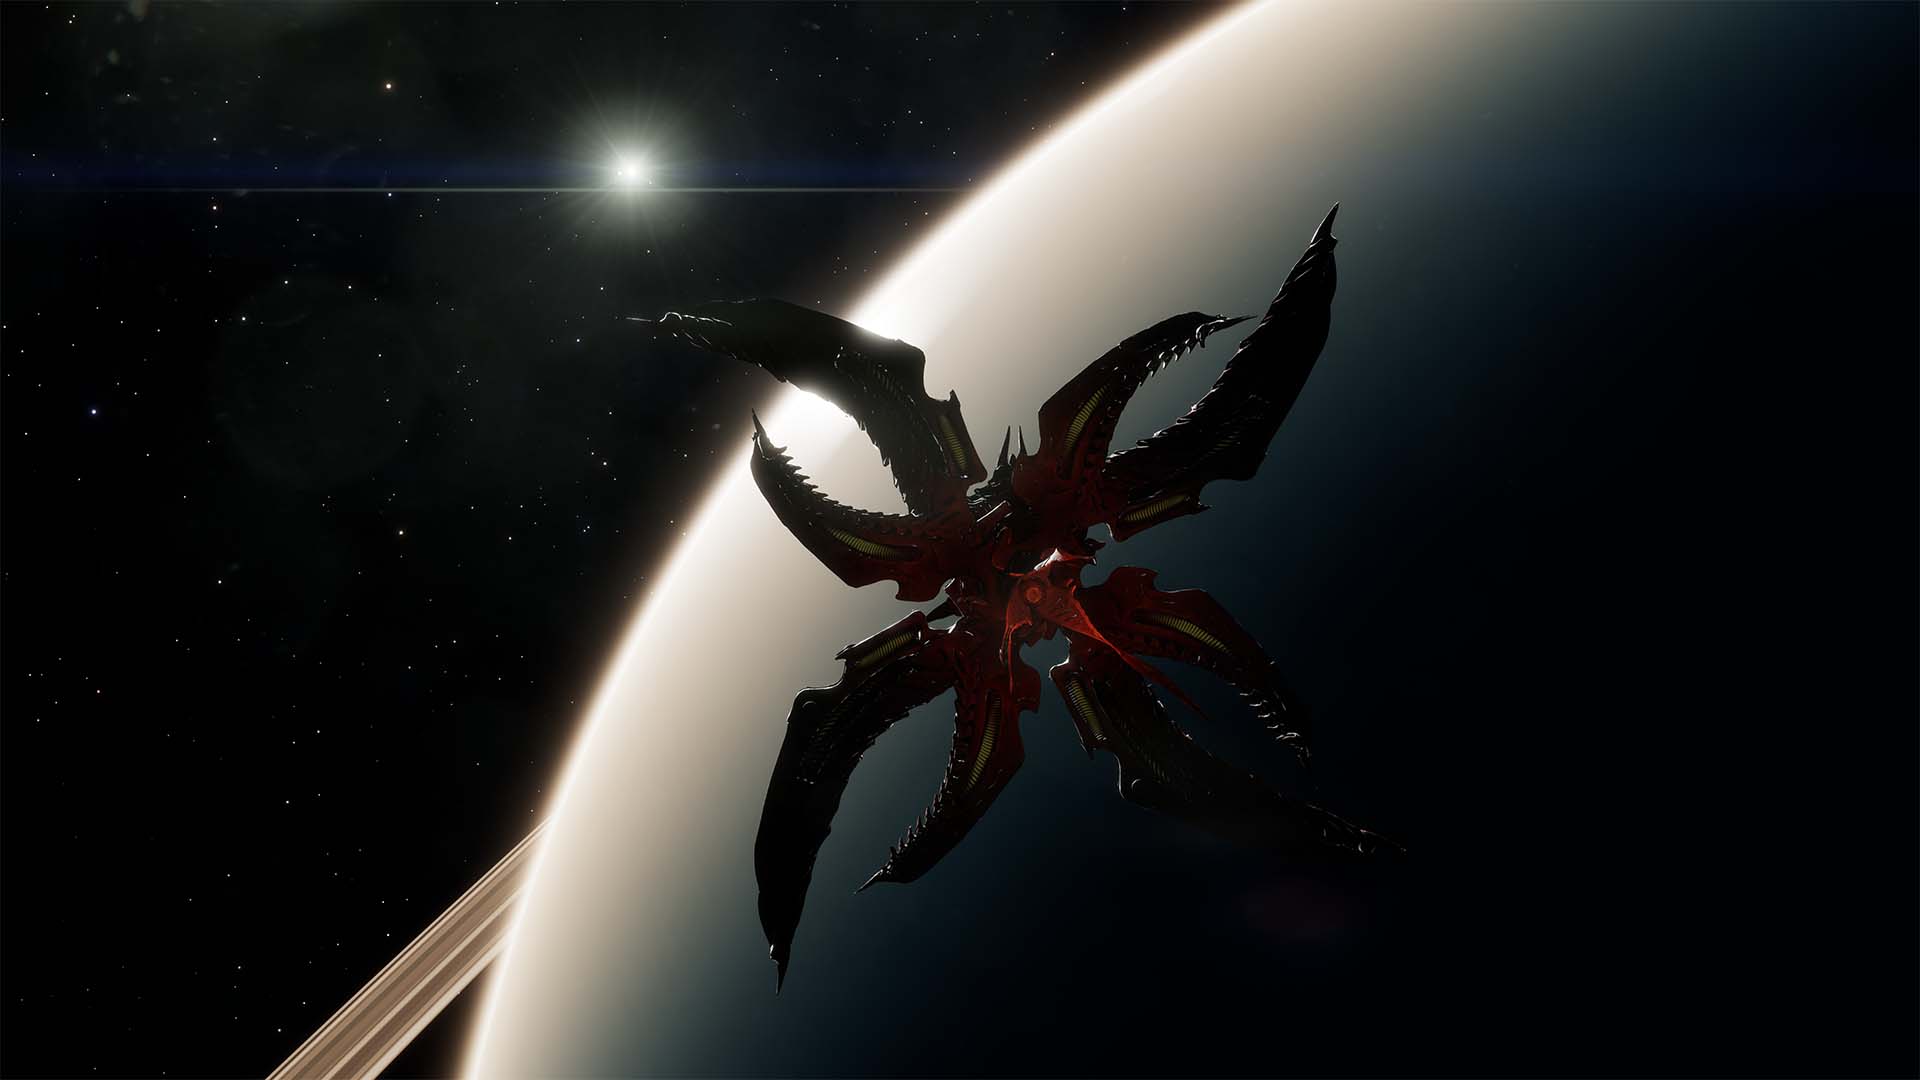 Elite Dangerous: Odyssey Update 15 released, adds significant new features